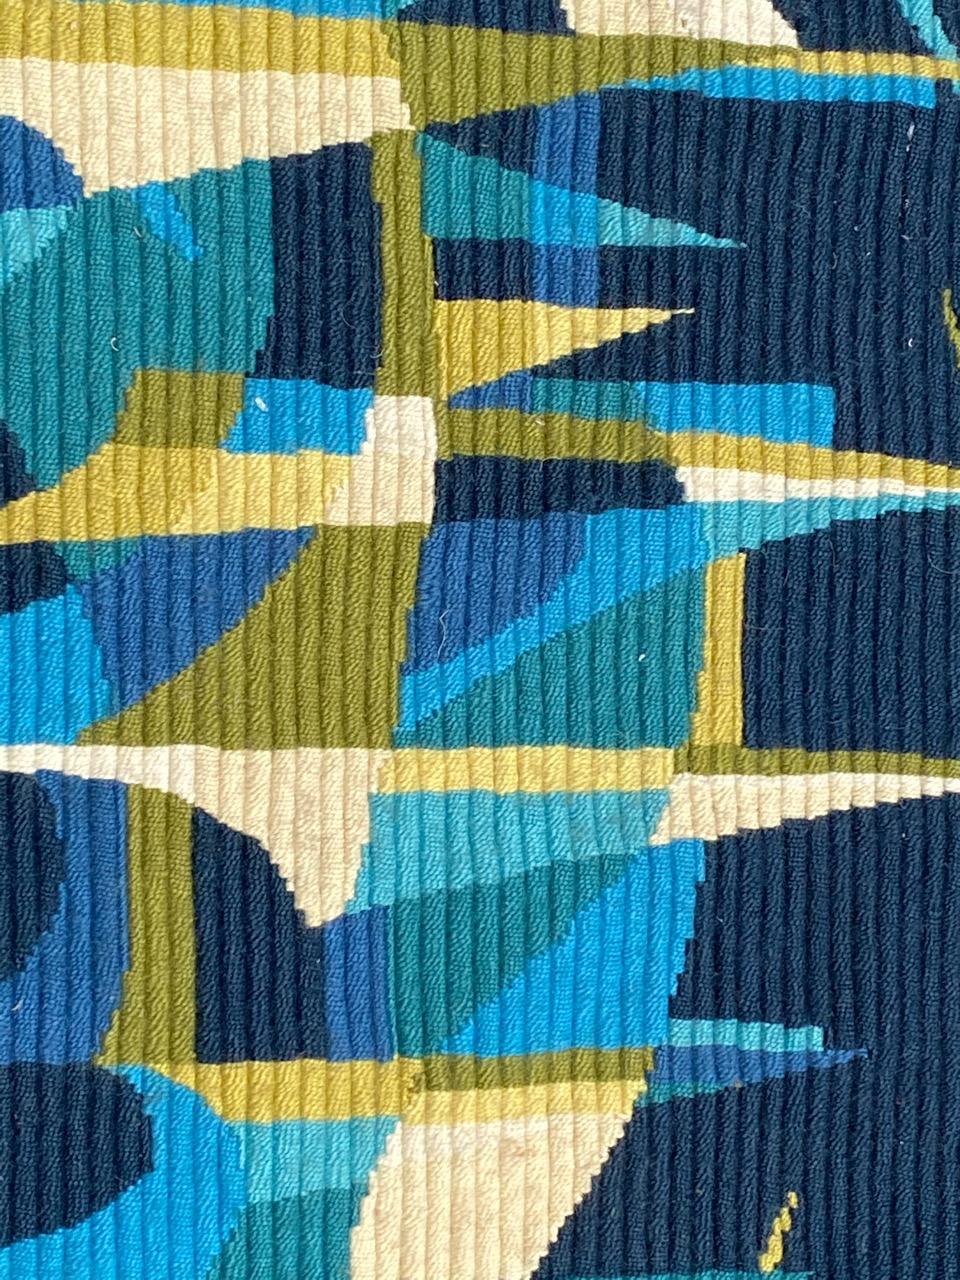 Français Bobyrug's Nice French Modern Tapestry with a Design of Gilles Duvert (Tapisserie française moderne avec un design de Gilles Duvert) en vente